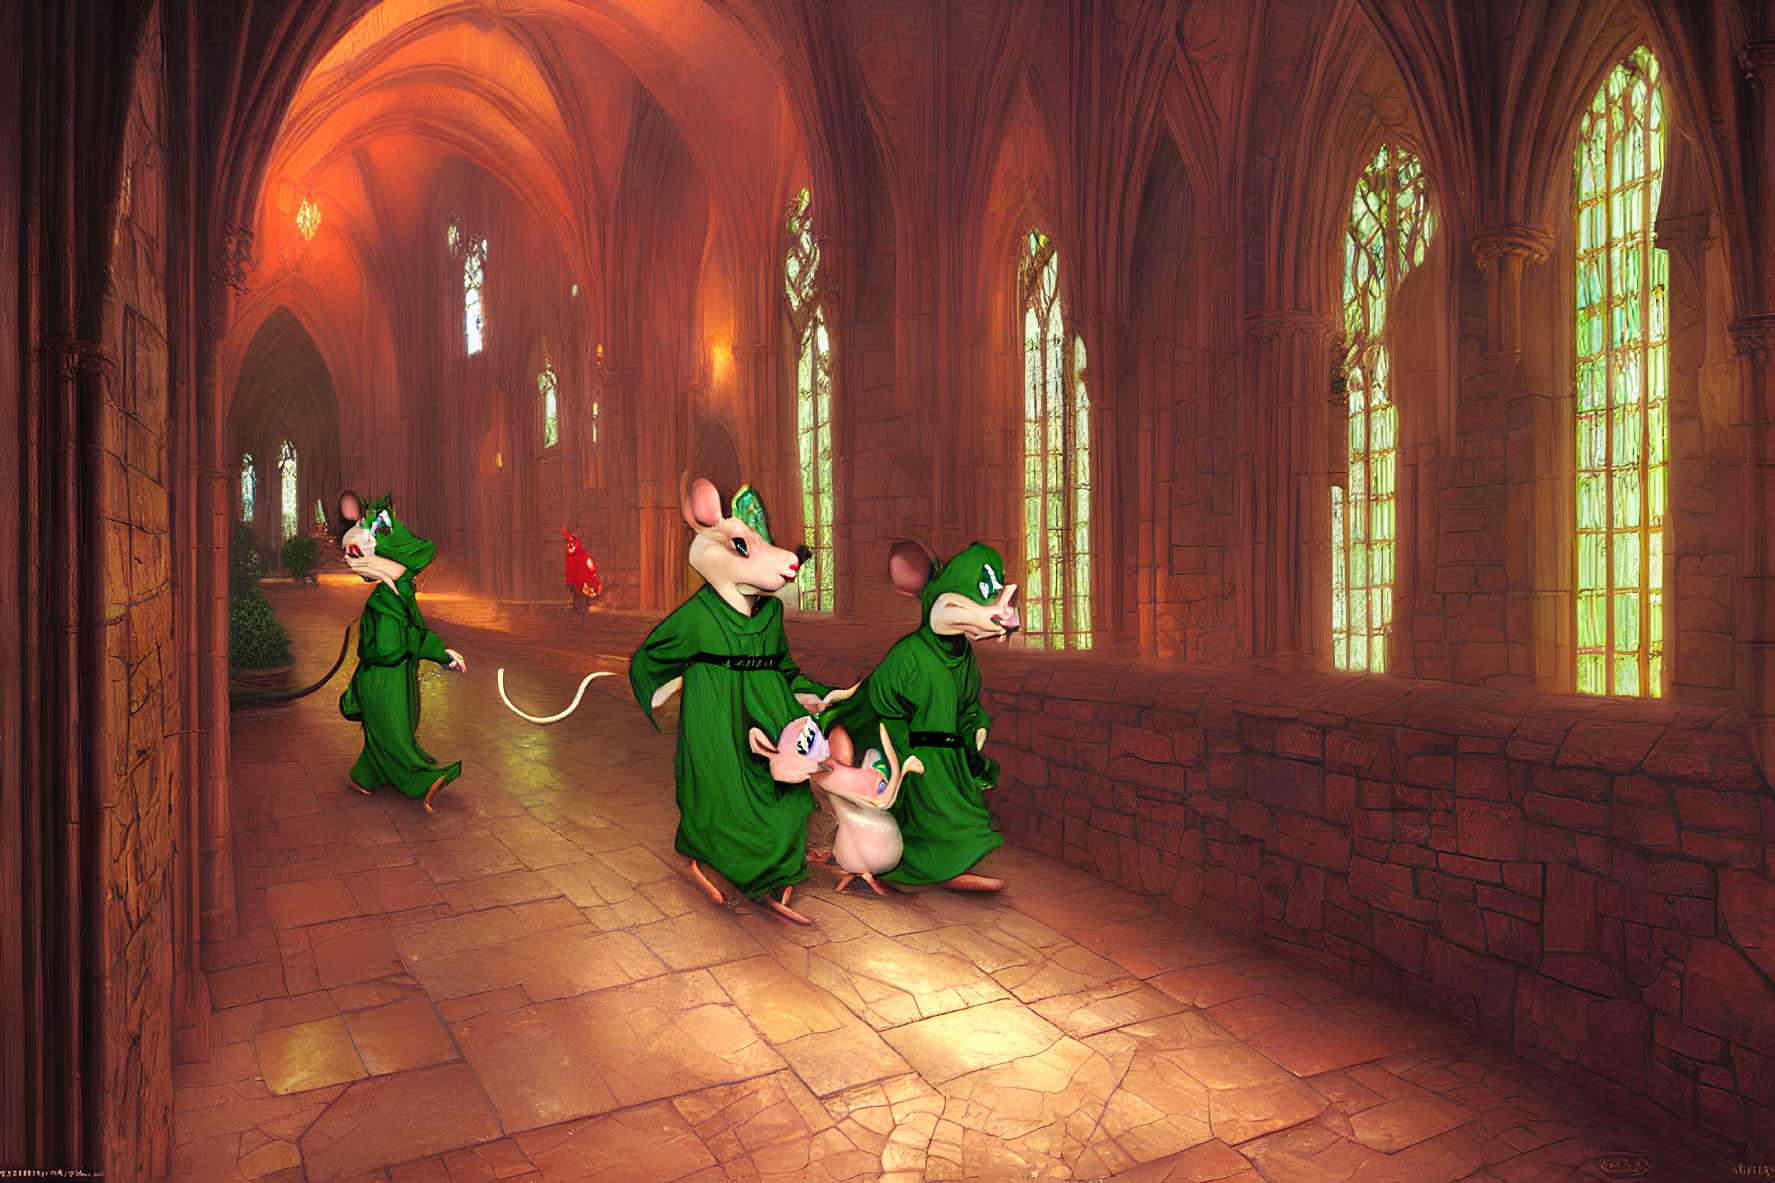 Three cartoon mice in cloaks in a gothic cathedral with stained-glass windows, one holding a